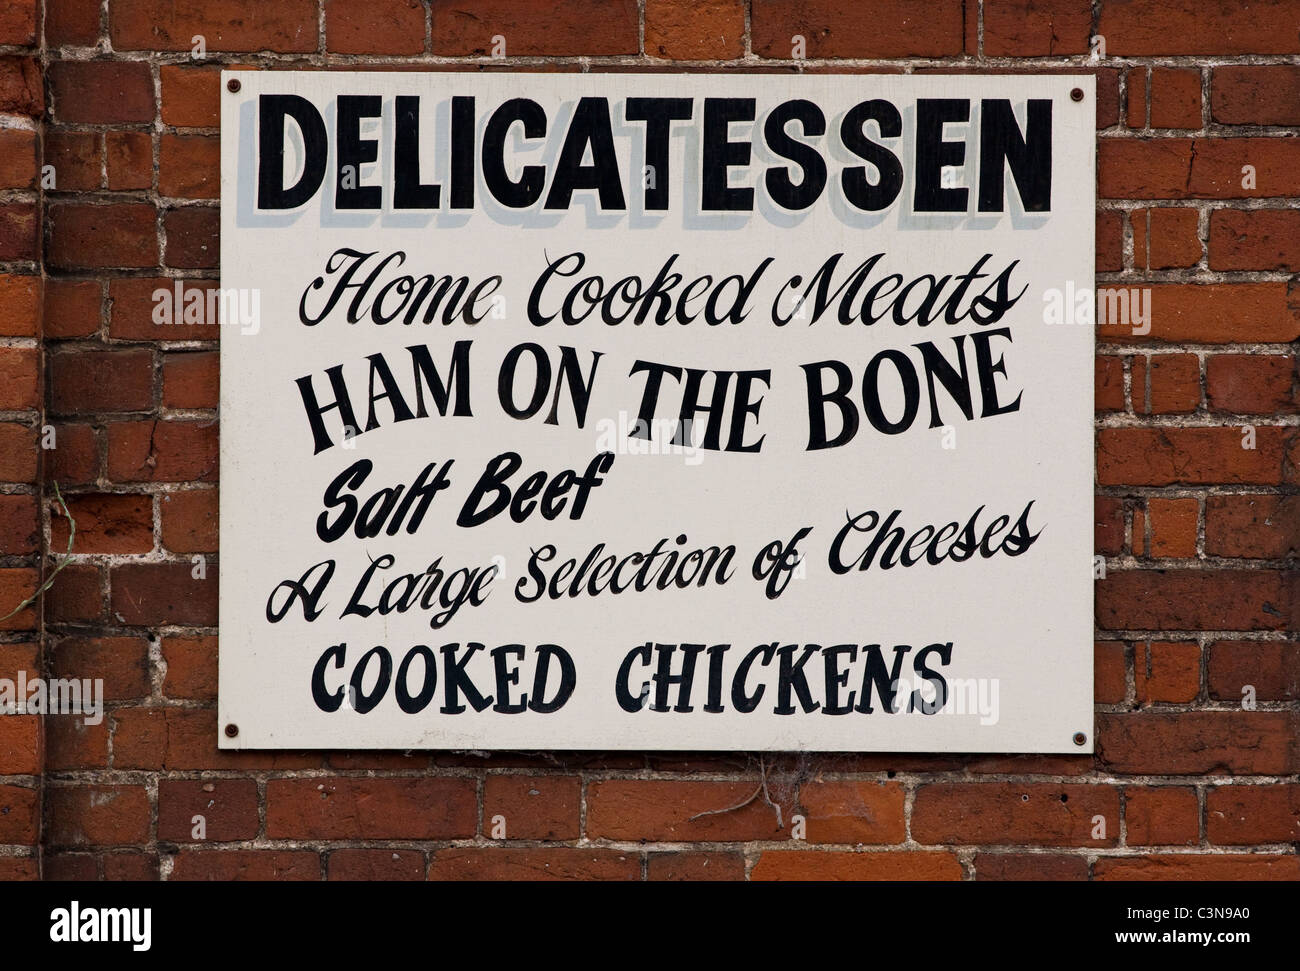 Vector Signage For Cheese House Stock Illustration - Download Image Now -  Delicatessen, Sign, Appetizer - iStock